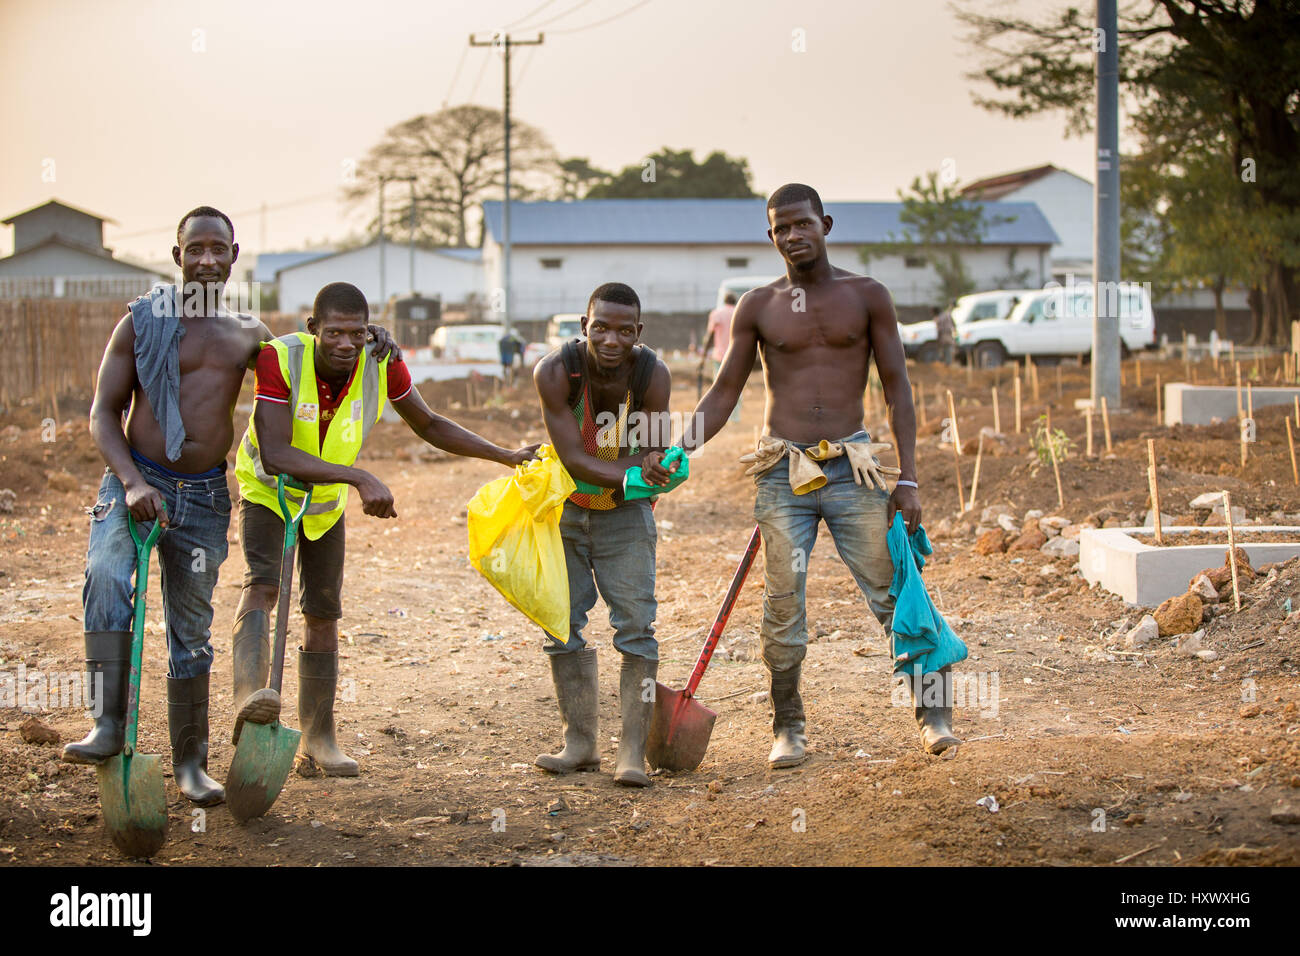 This team of gravediggers work hard to keep up with demand for burials in Freetown, Sierra Leone. Bonded in tough times. Stock Photo